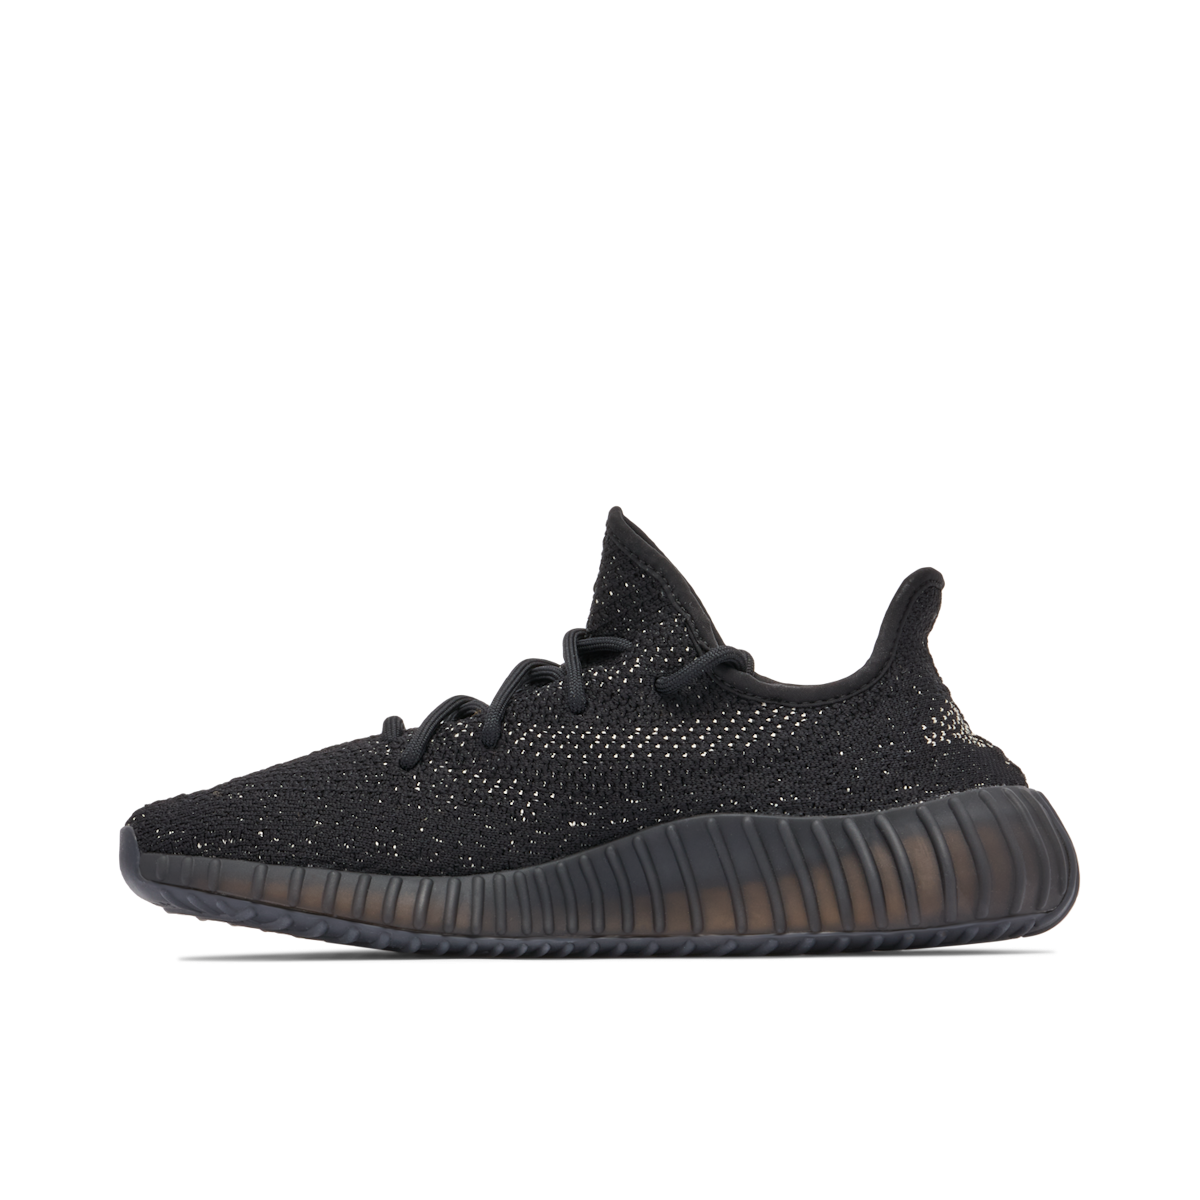 adidas Yeezy Boost 350 V2 Black reflective laces 5.5 M  Adidas yeezy boost,  Yeezy boost, Adidas yeezy boost 350